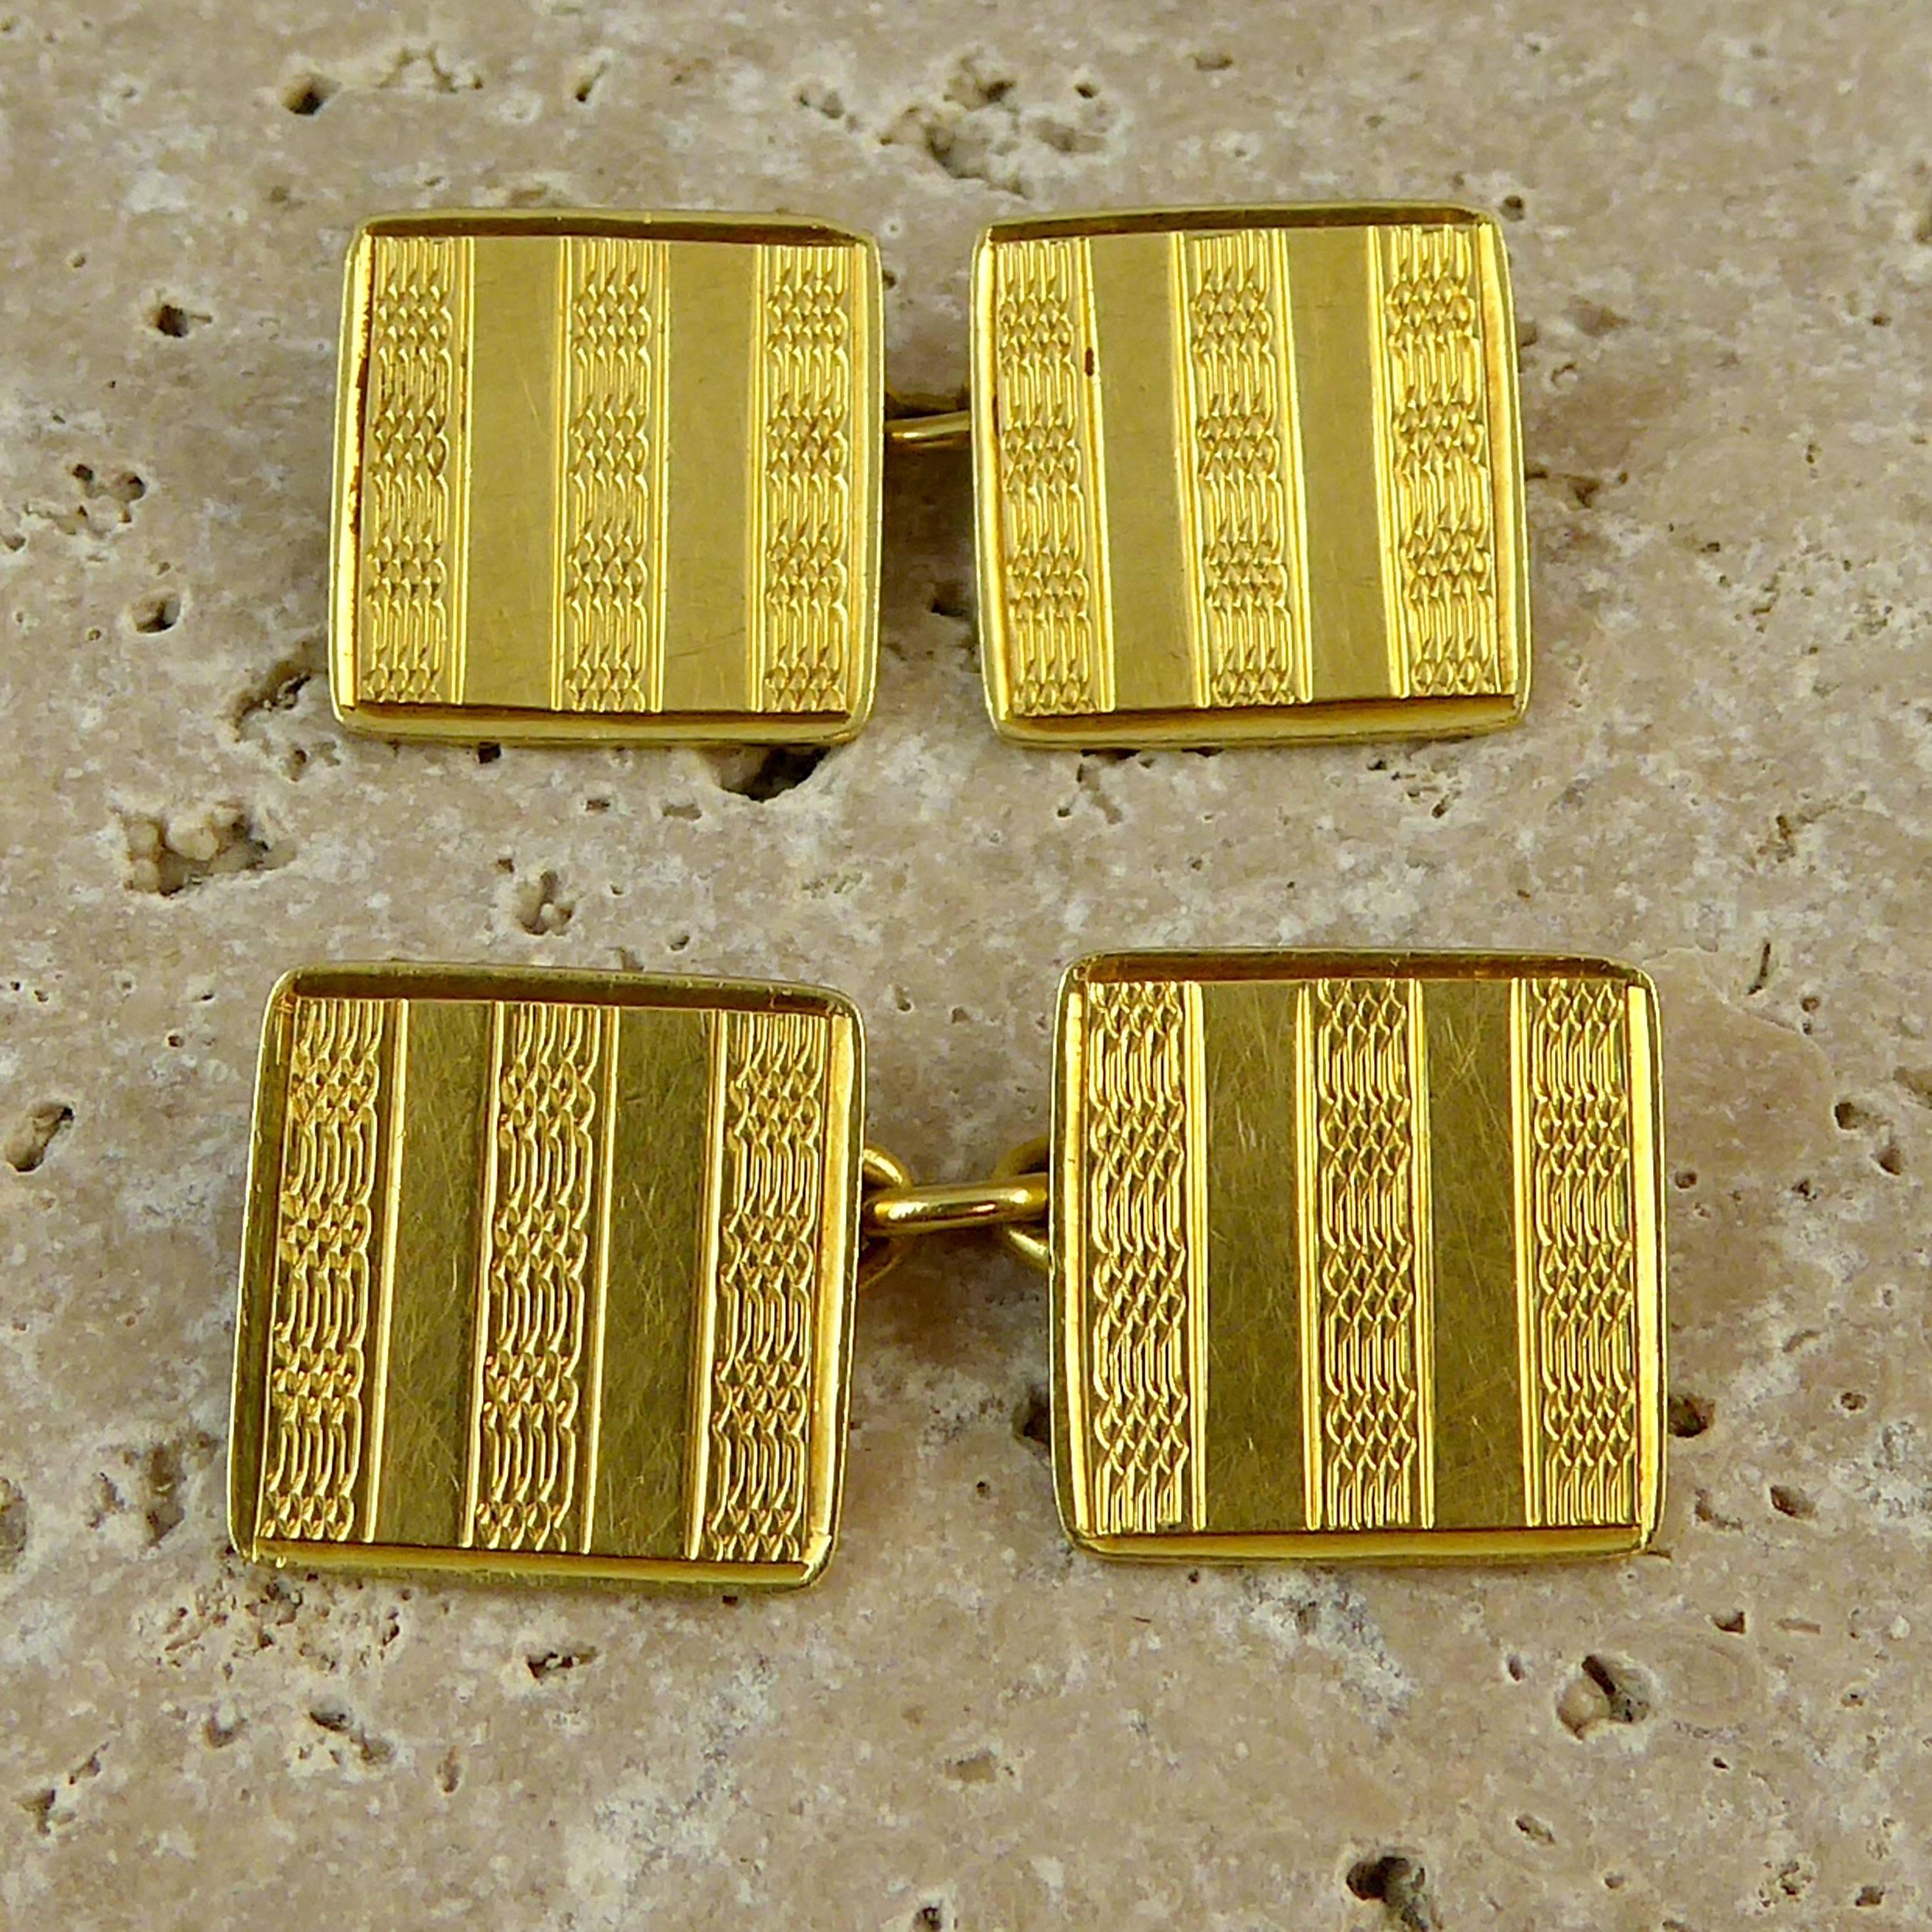 Art Deco cufflinks with engine turned engraved pattern.  The pattern has alternating stripes of a typical Art Deco wave pattern with a plain polished section.  Both sides of the cufflinks are decorated and they are connect by gold chain.